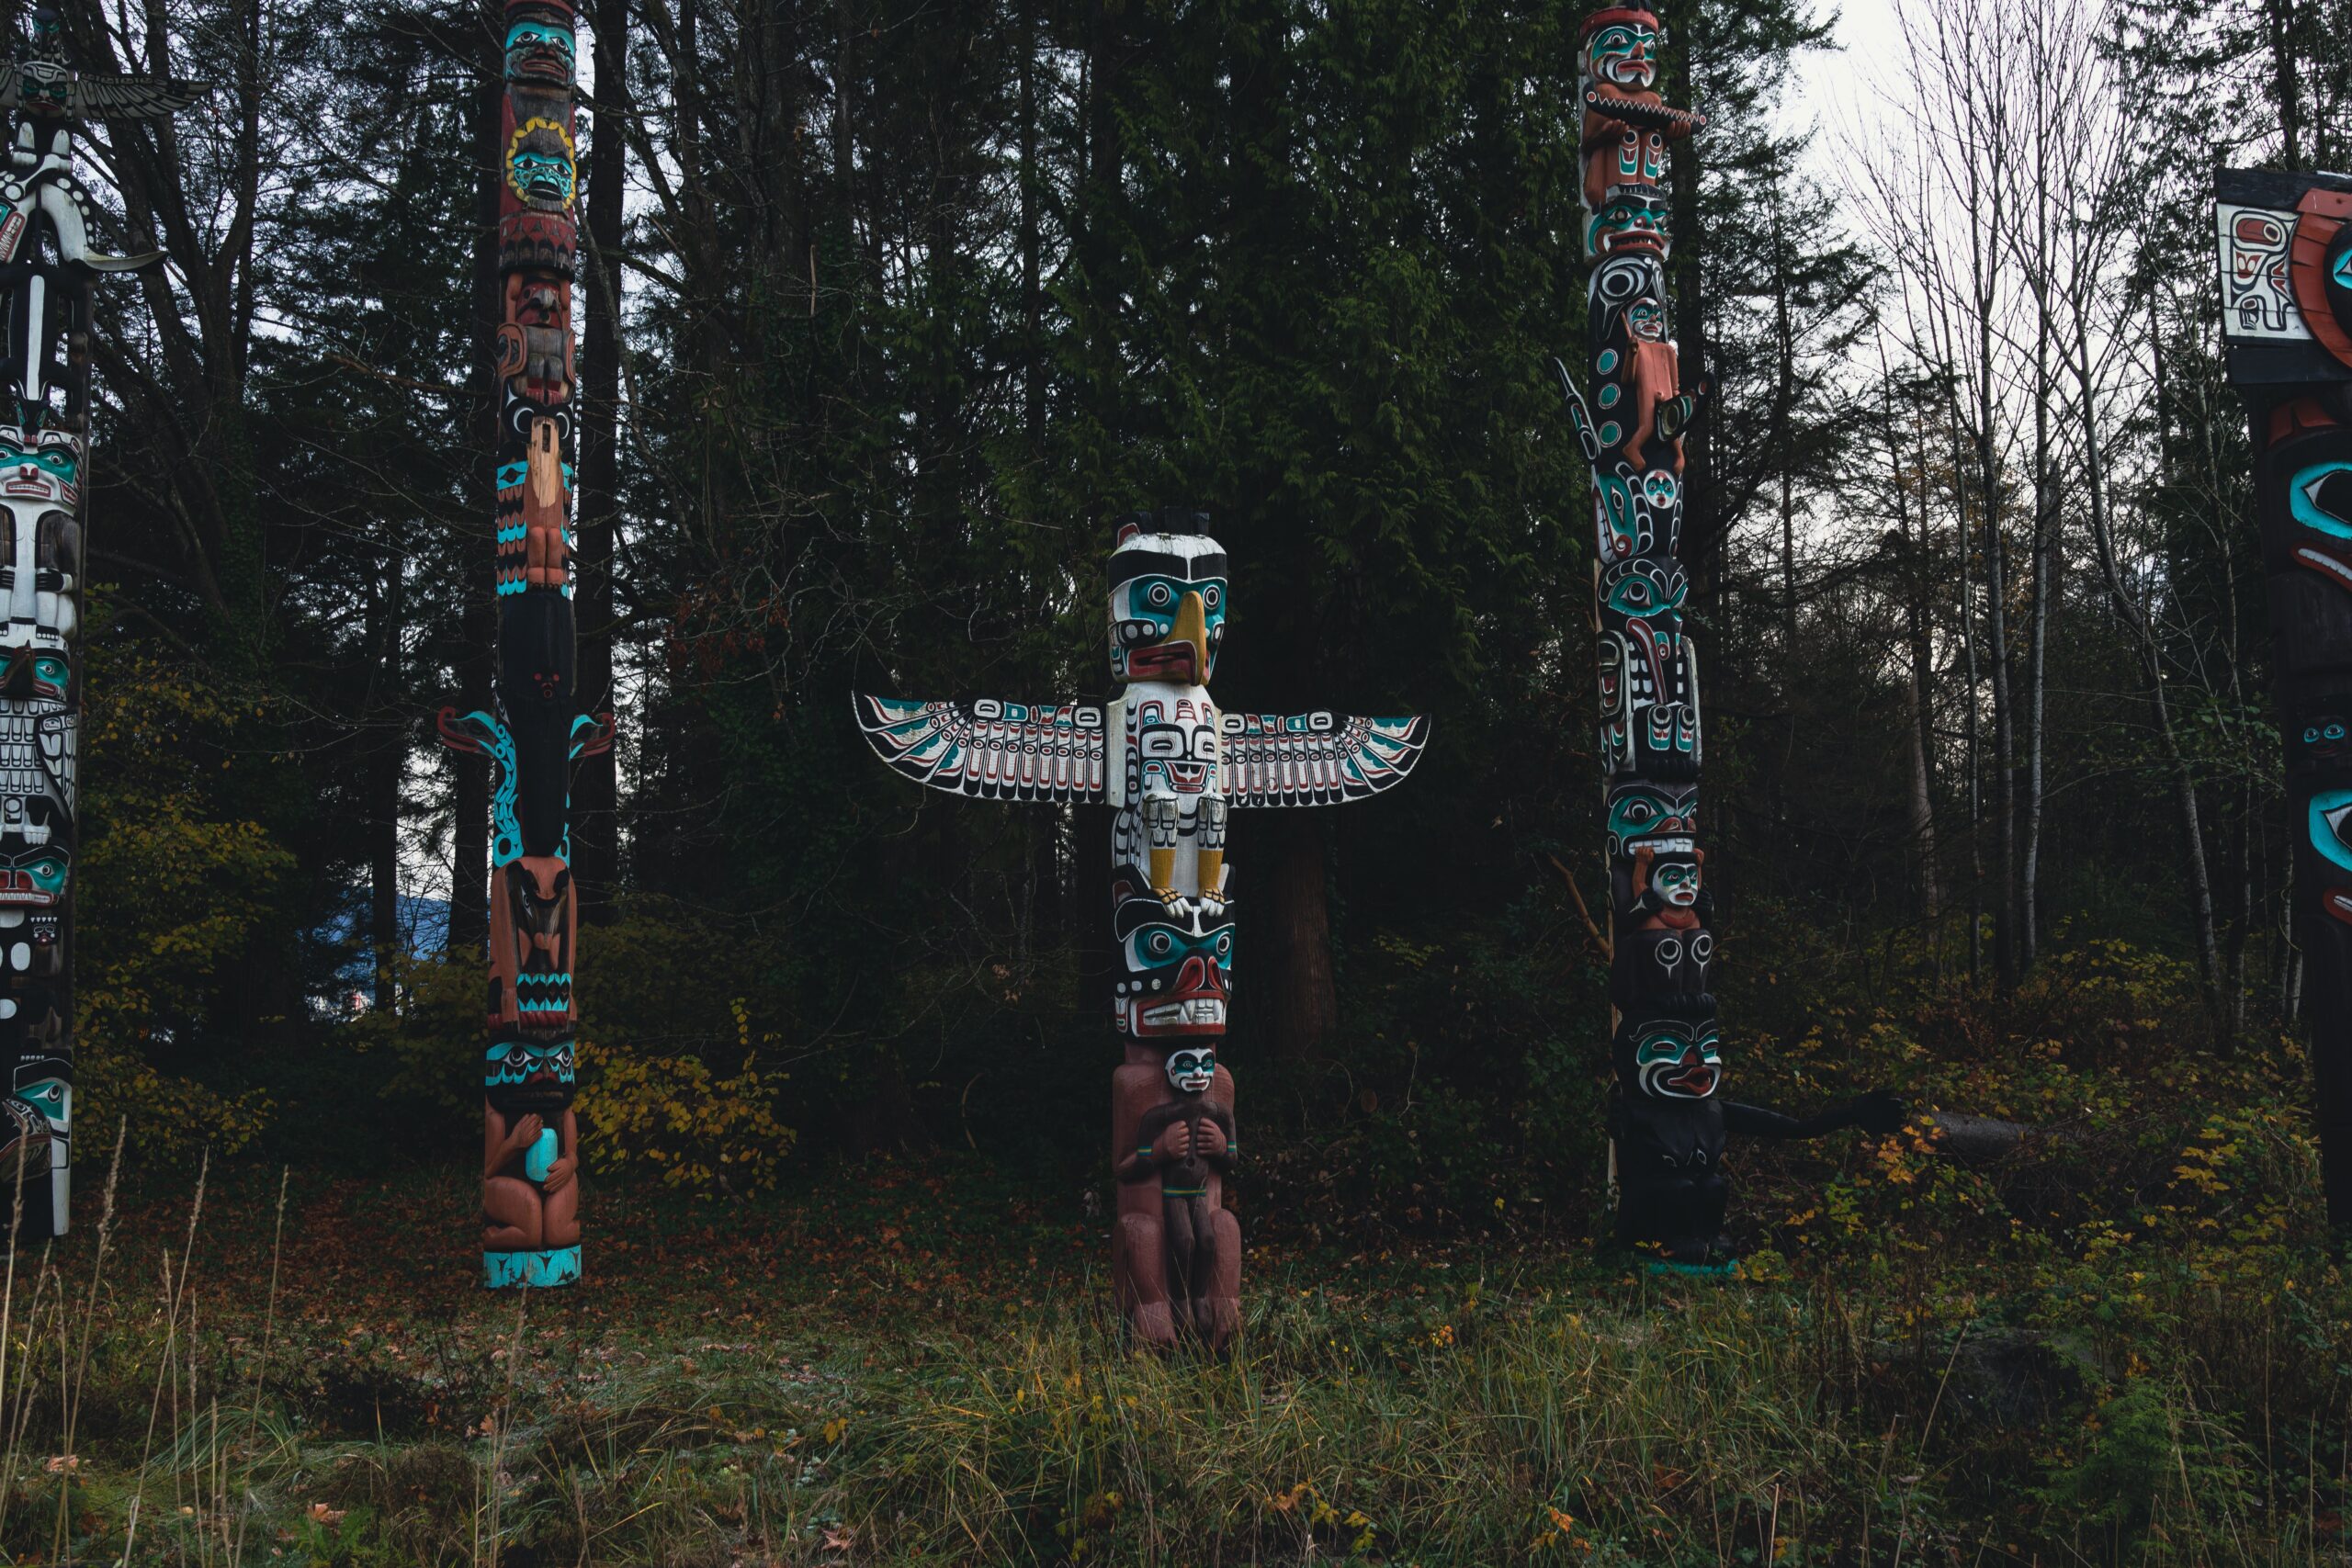 A field with Indigenous totem poles against a background of forest